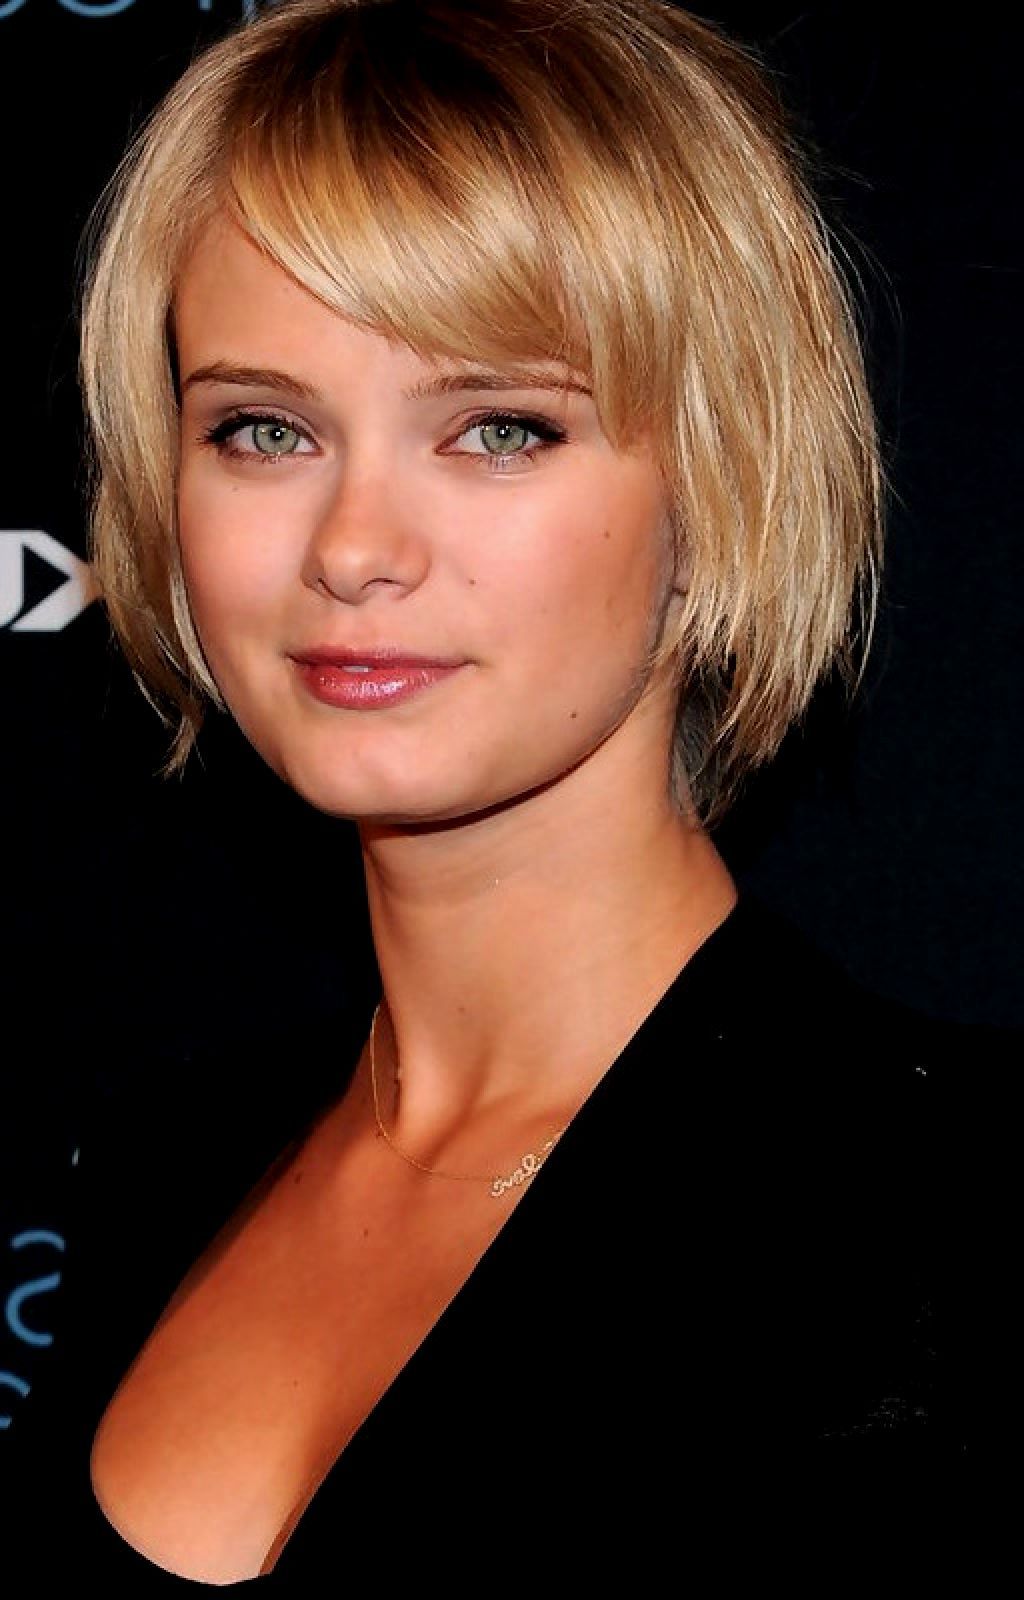 Short Hairstyles With Bangs For Fine Hair – Hairstyles Ideas Regarding Short Haircuts With Bangs For Fine Hair (View 4 of 25)